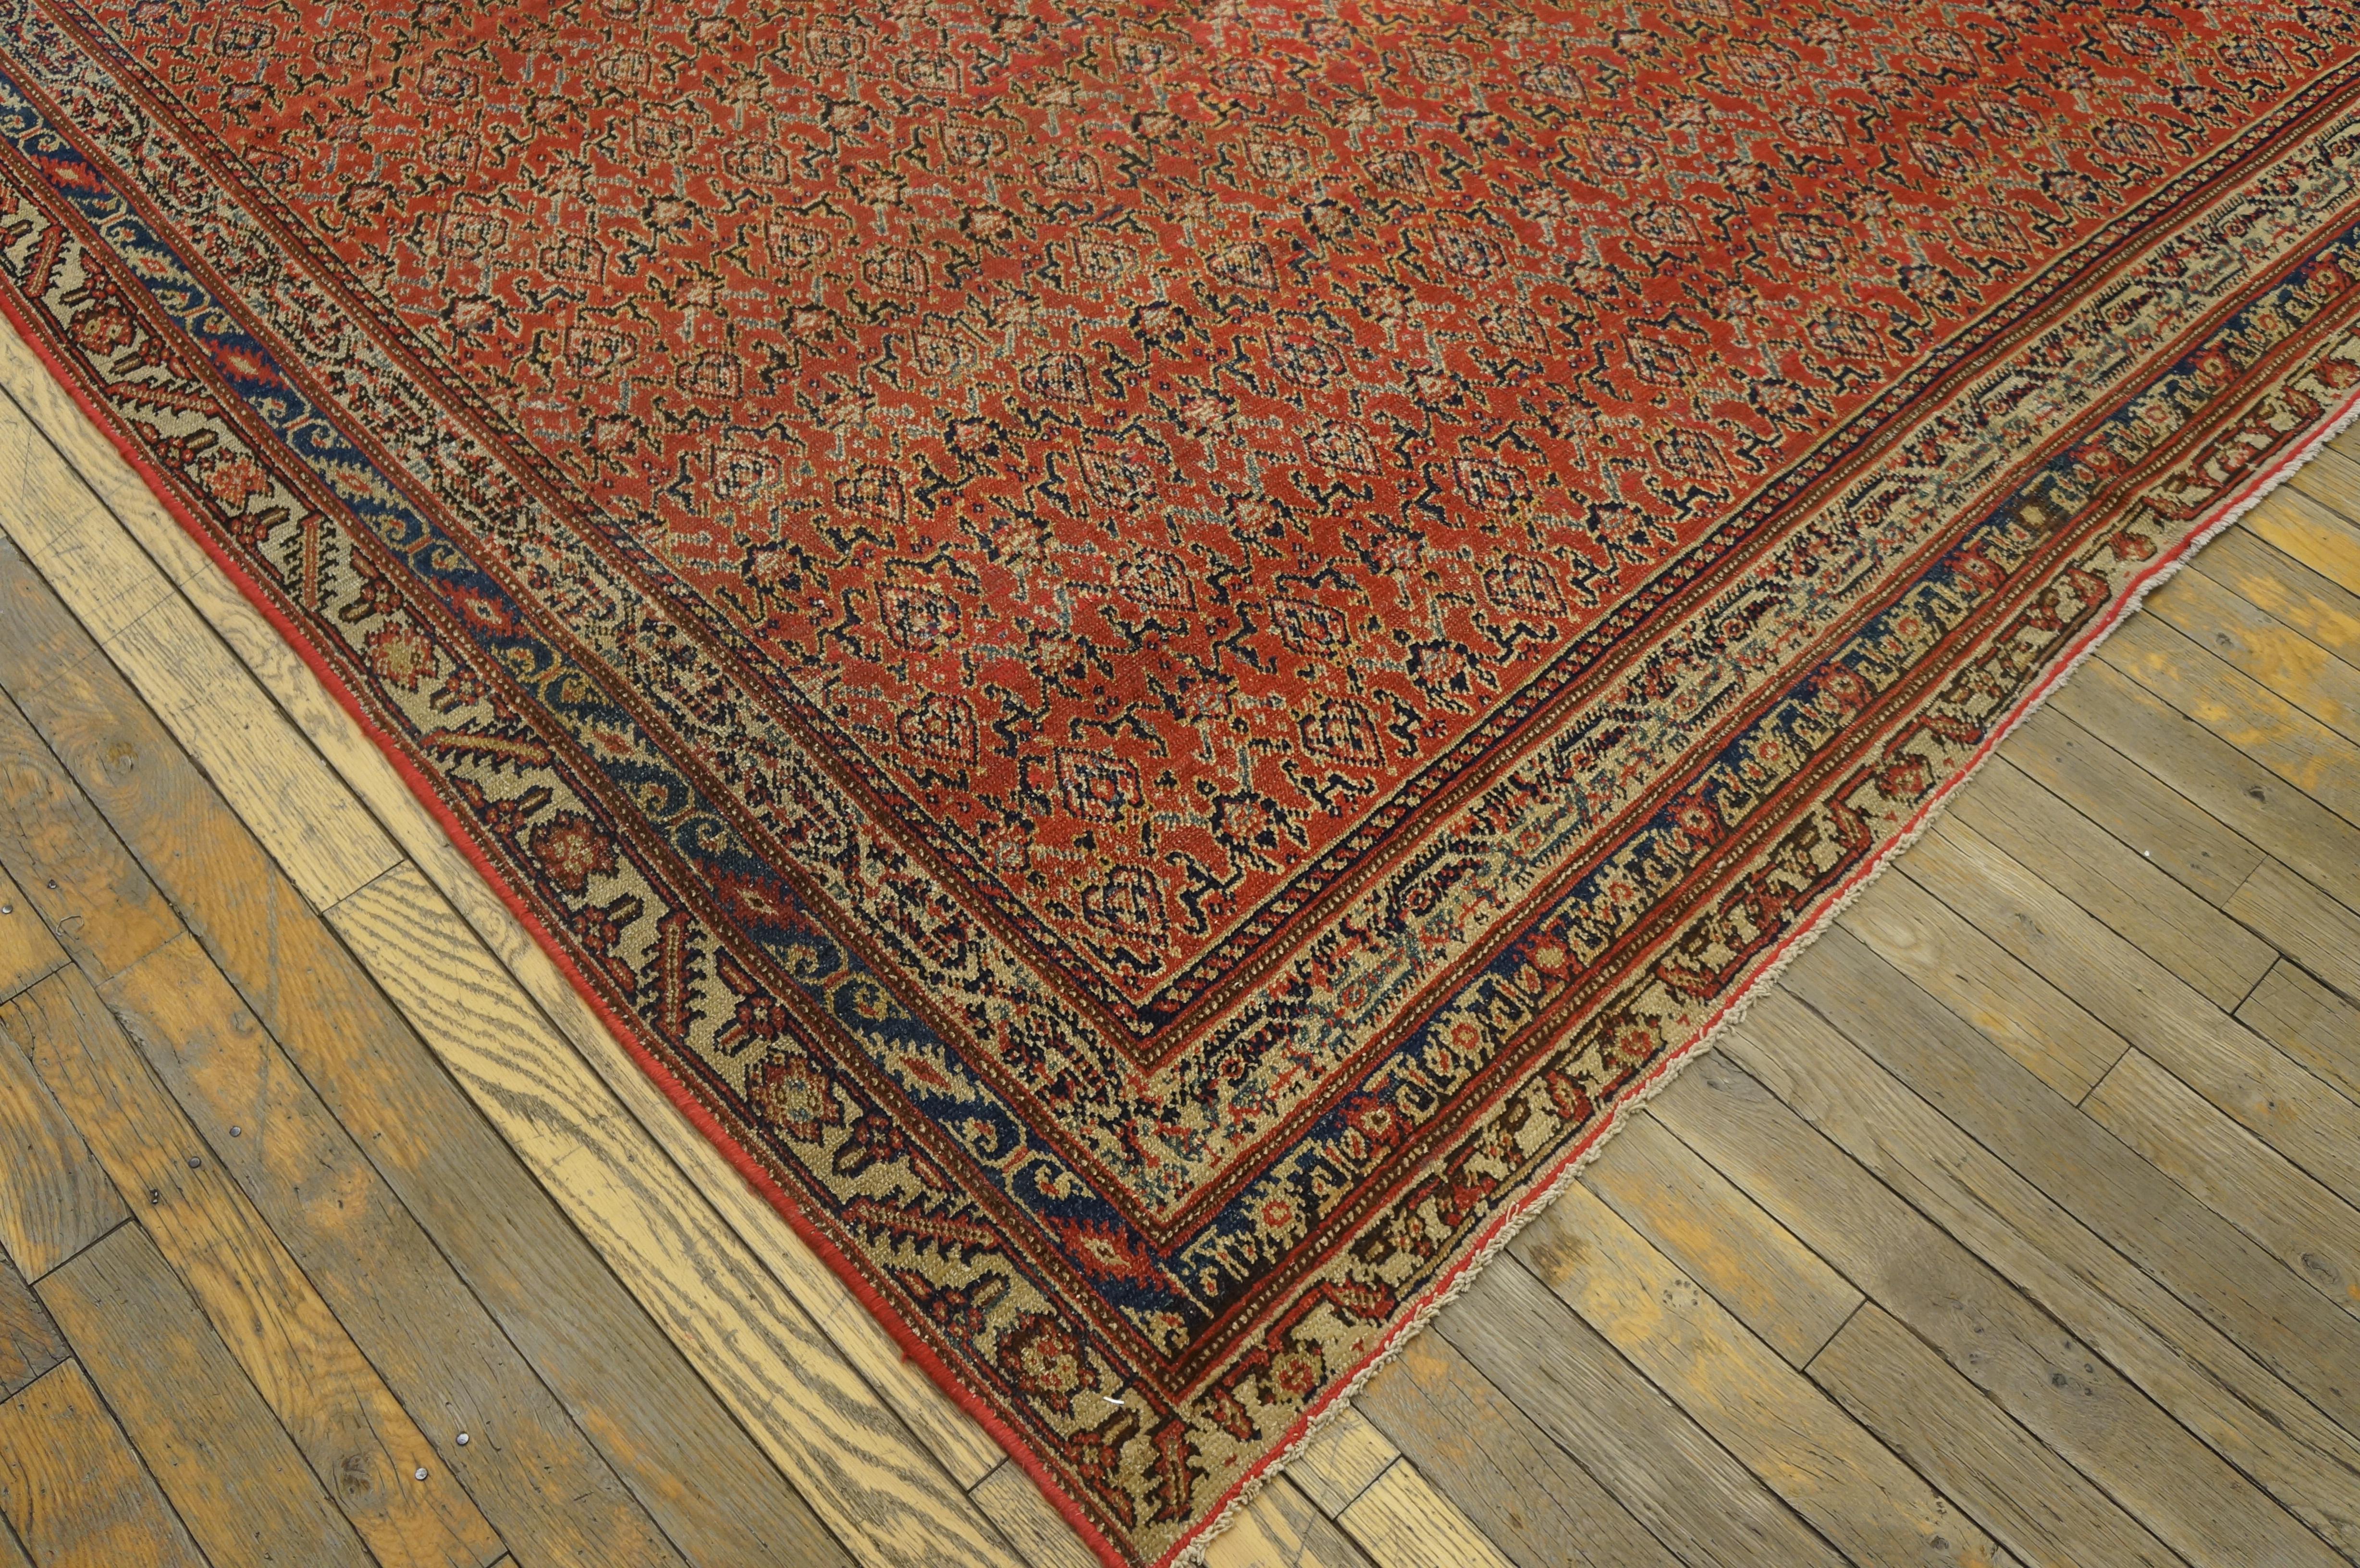 Antique Persian rug from Saraband with all-over pattern in red background, size: 6'1